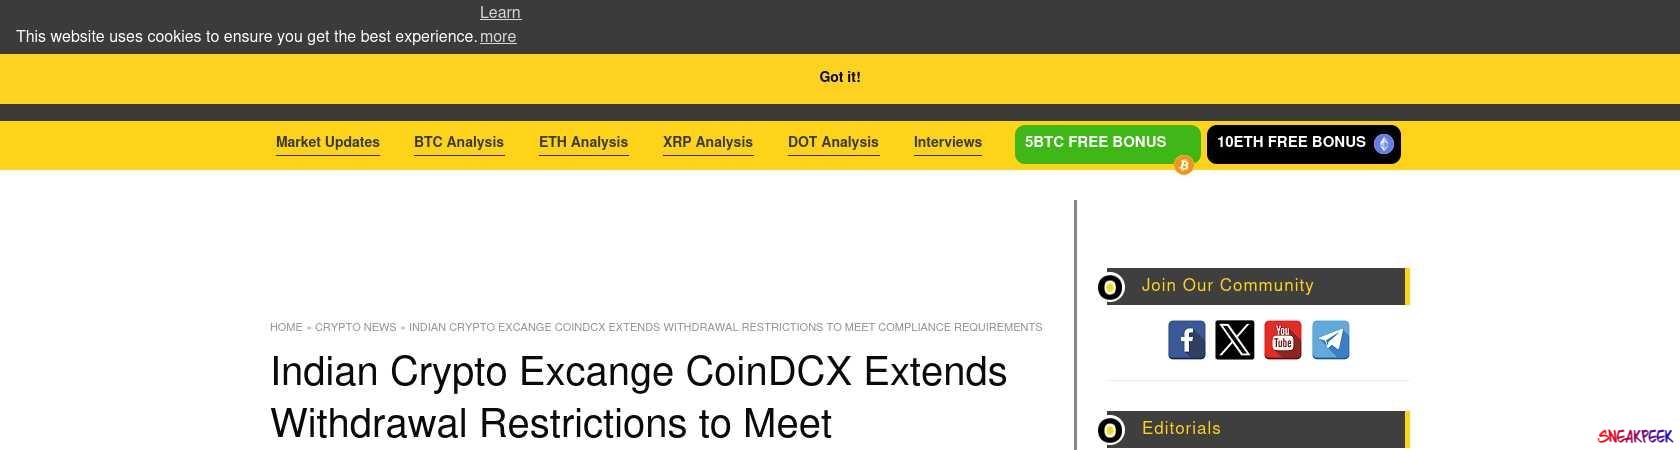 Read the full Article:  ⭲ Indian Crypto Excange CoinDCX Extends Withdrawal Restrictions to Meet Compliance Requirements